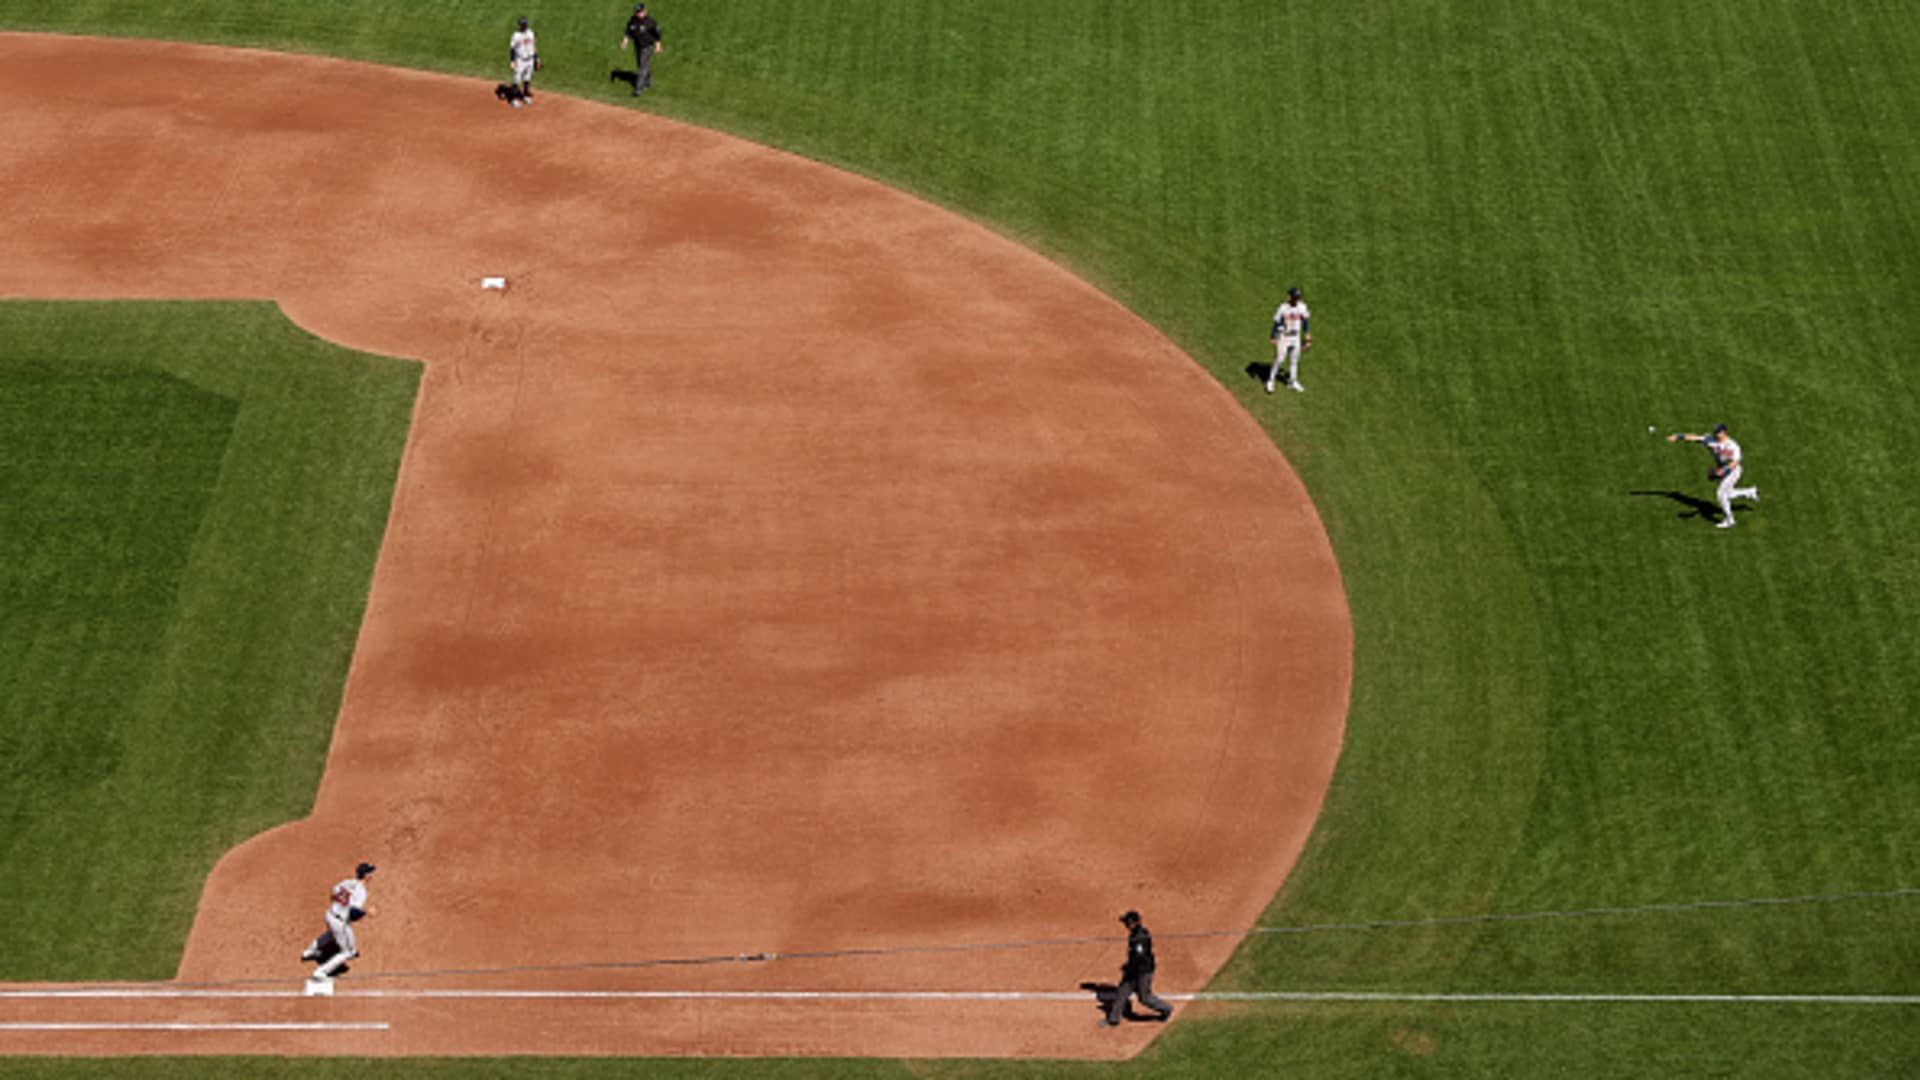 Defensive shifts like this one will no longer be allowed under the MLB's new rules.